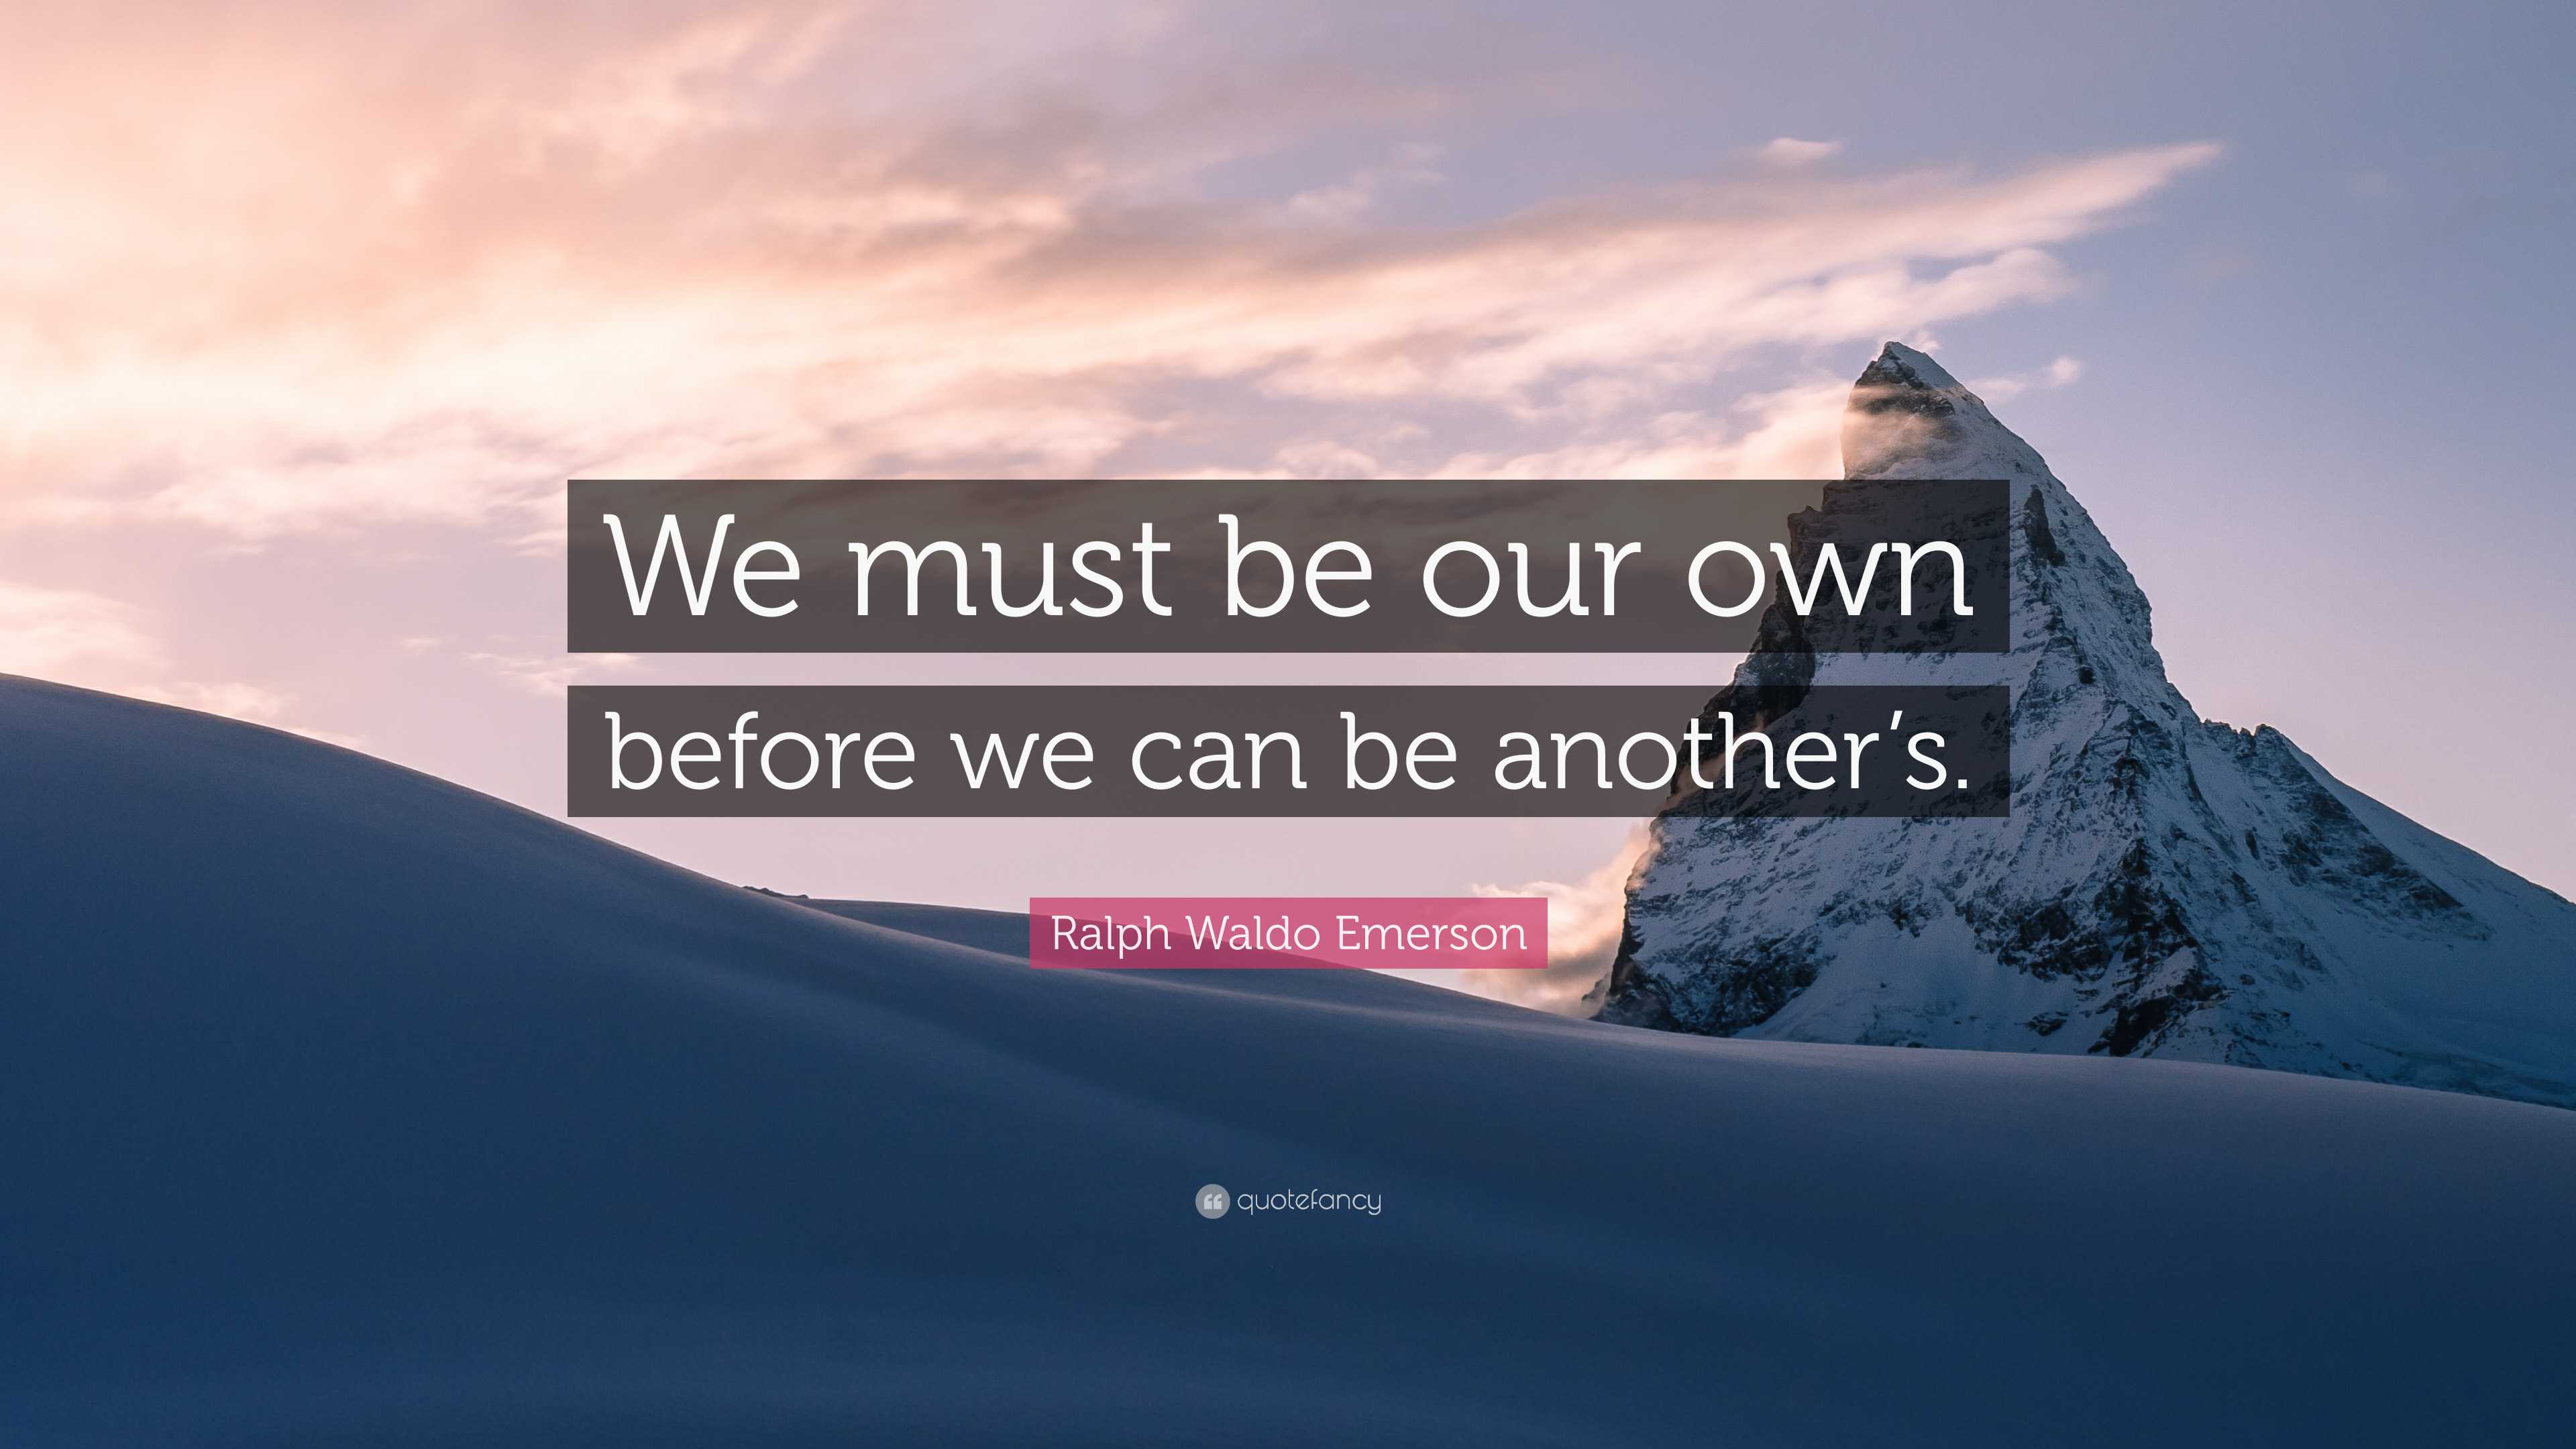 https://quotefancy.com/media/wallpaper/3840x2160/7728690-Ralph-Waldo-Emerson-Quote-We-must-be-our-own-before-we-can-be.jpg